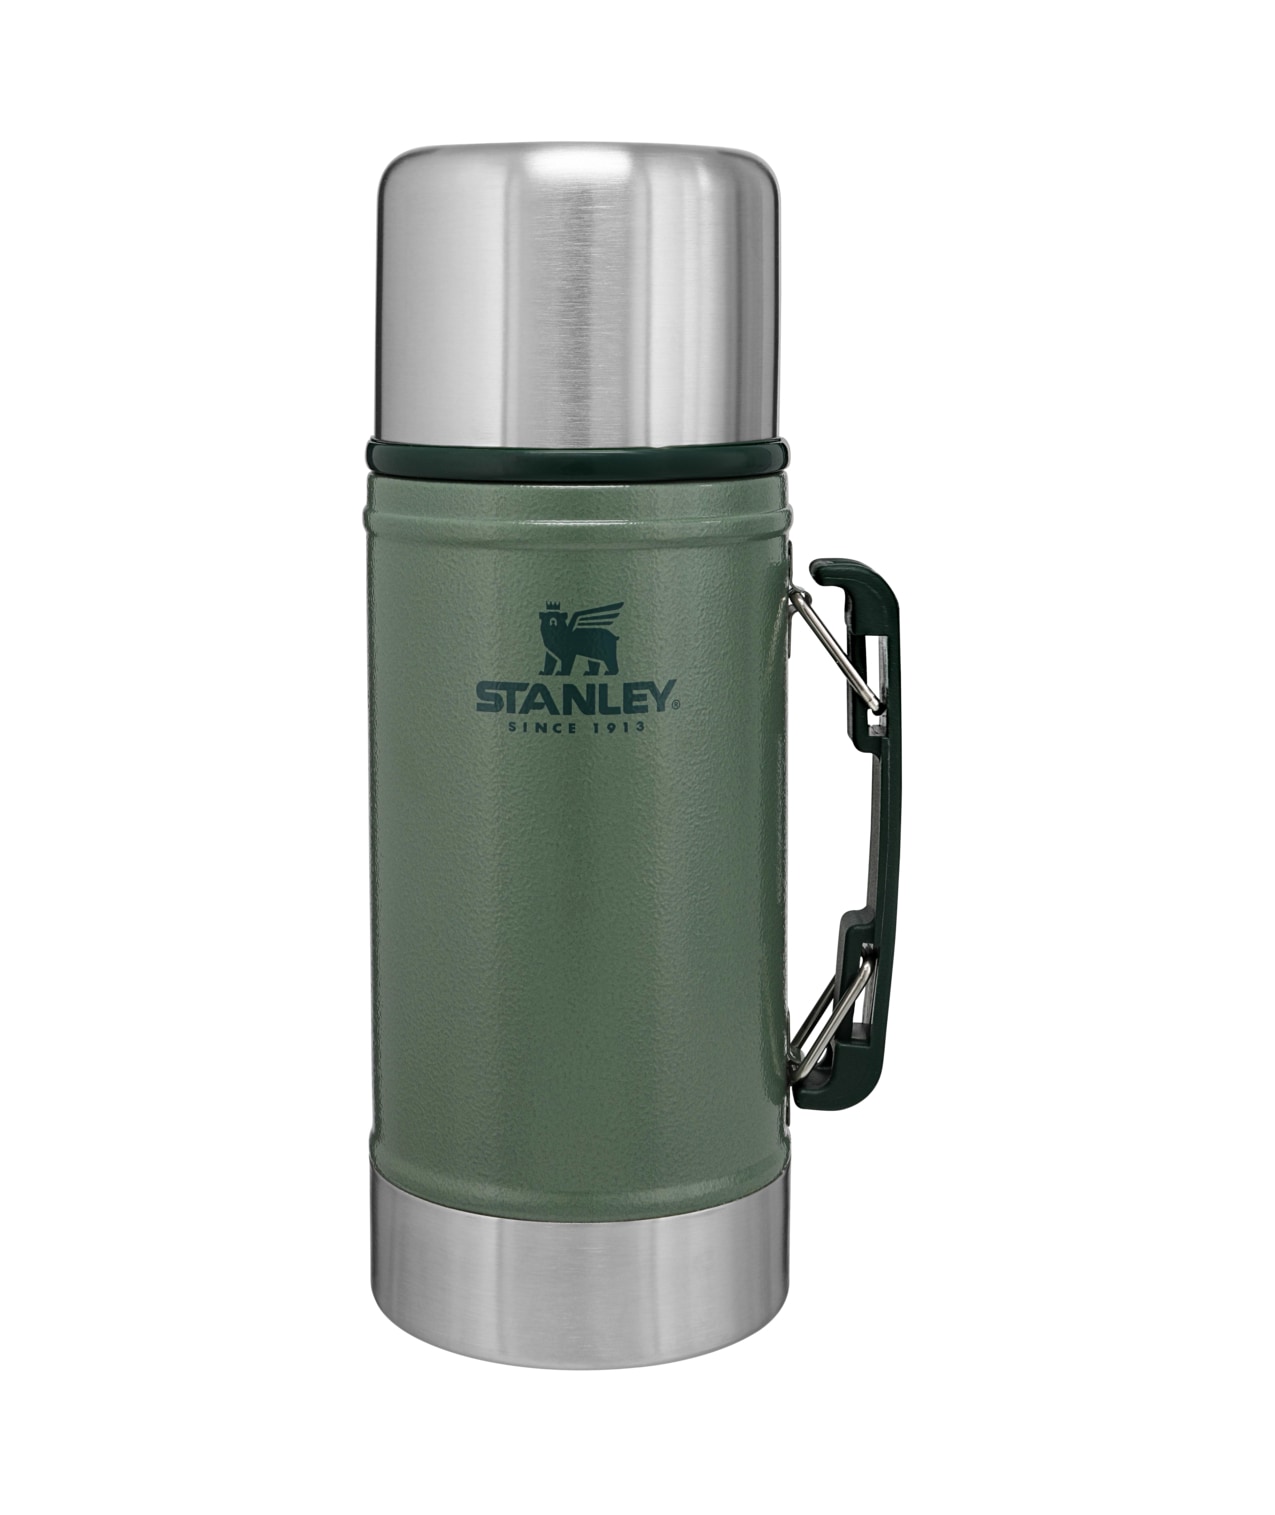 Stanley 24-fl oz Stainless Steel Insulated Cup